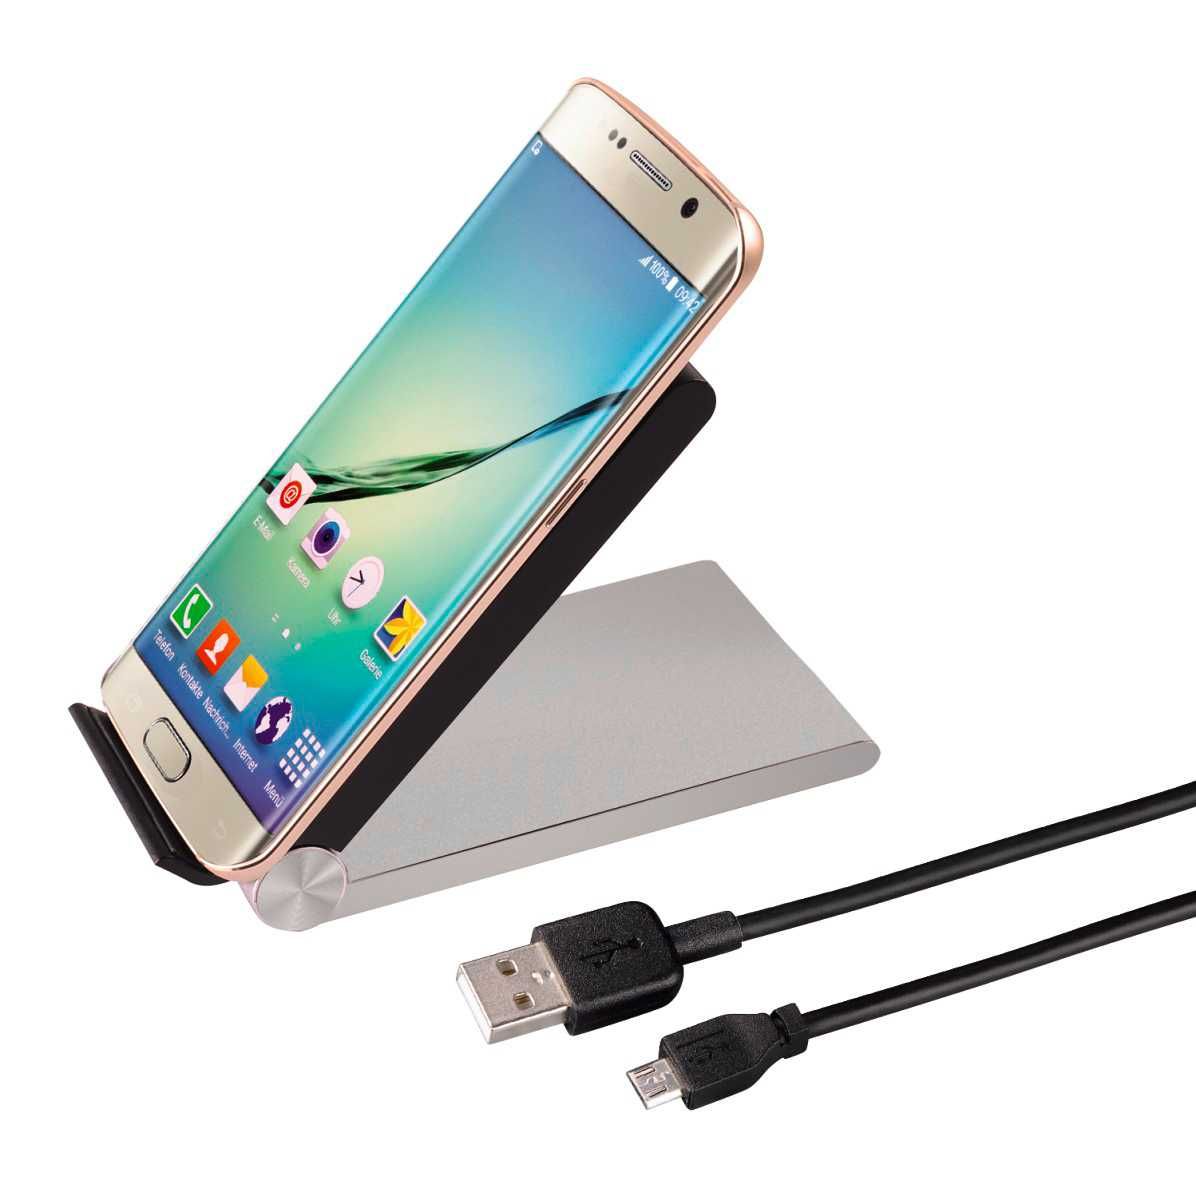 Incarcator wireless Qi HAMA Desk Inductive Charger, in cutie